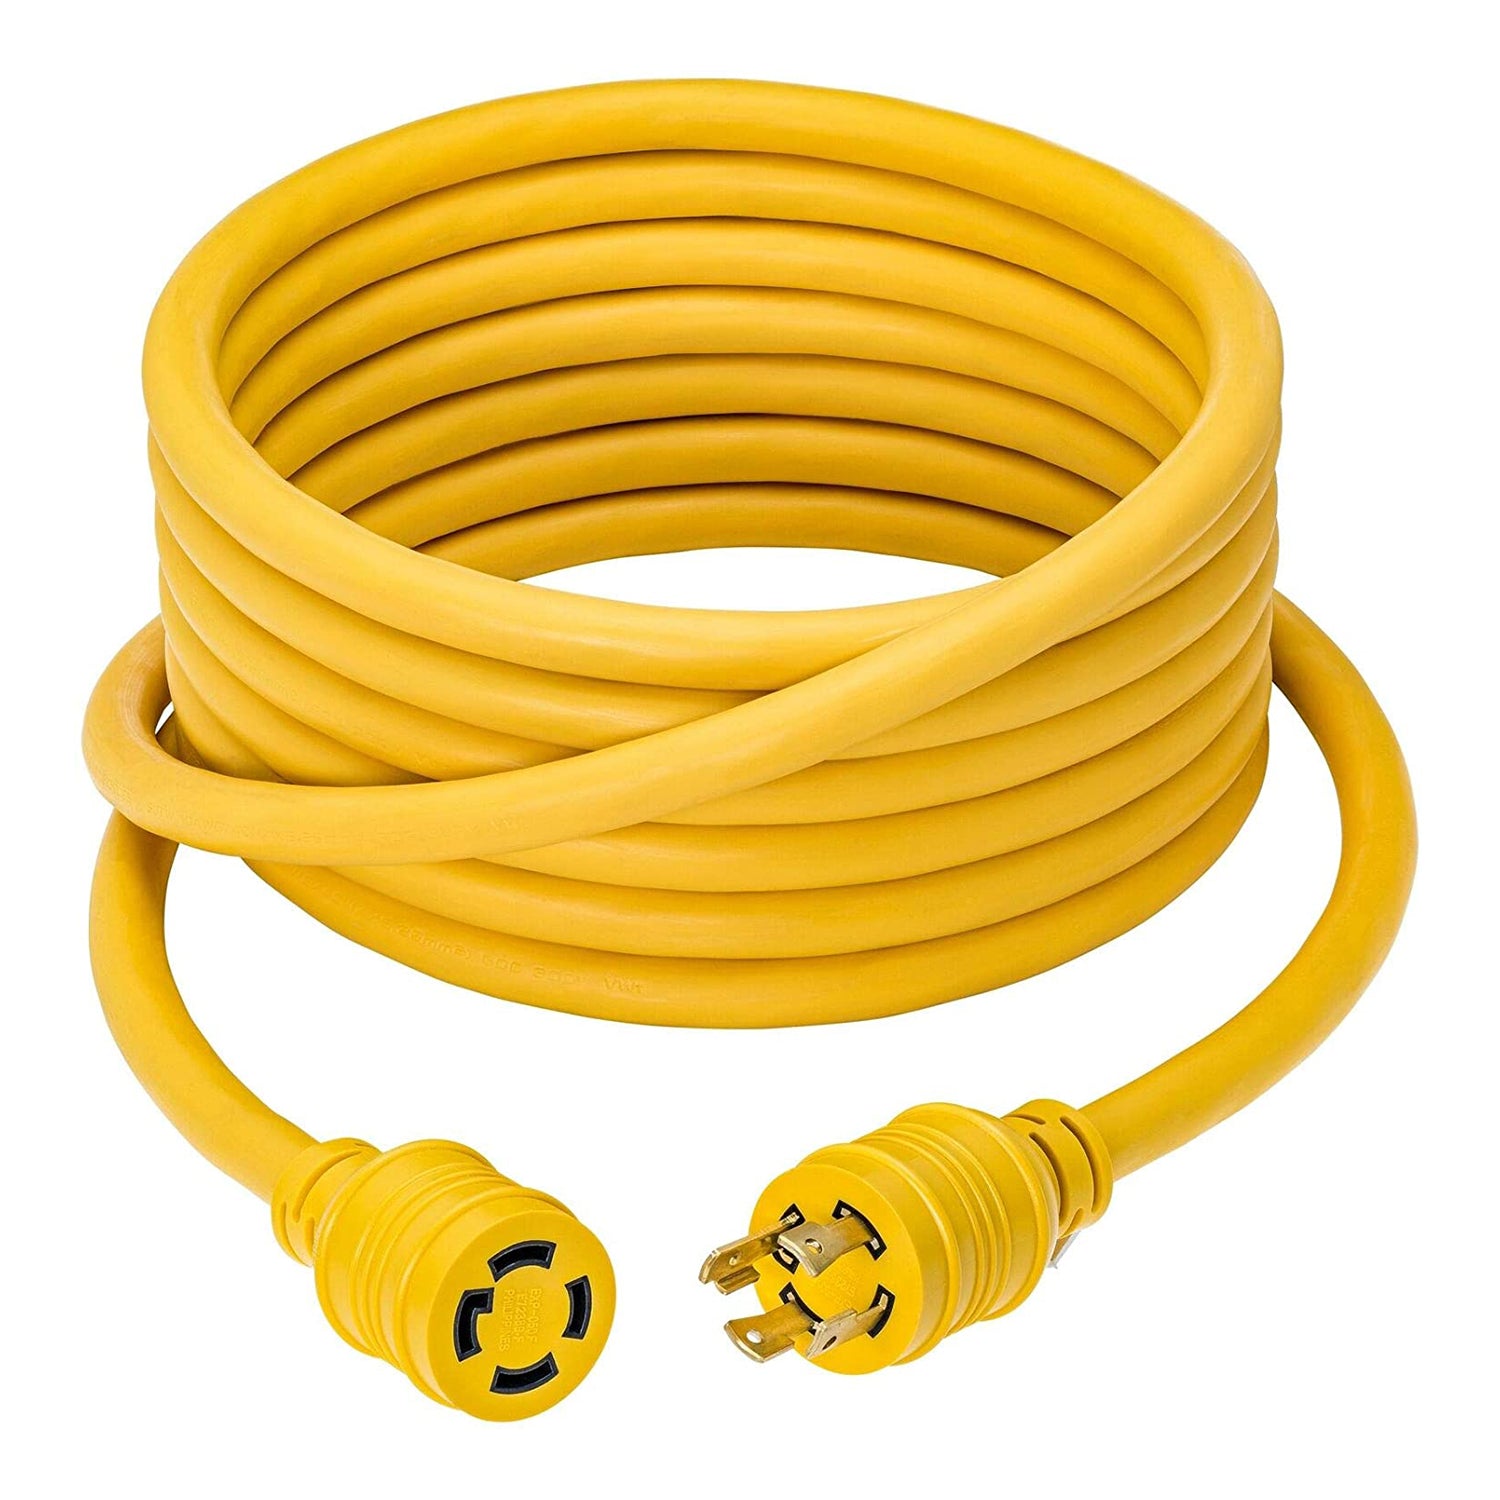 100 Foot Extension Power Cord - NEMA 4 Prong Twist & Lock with Cable Organizer